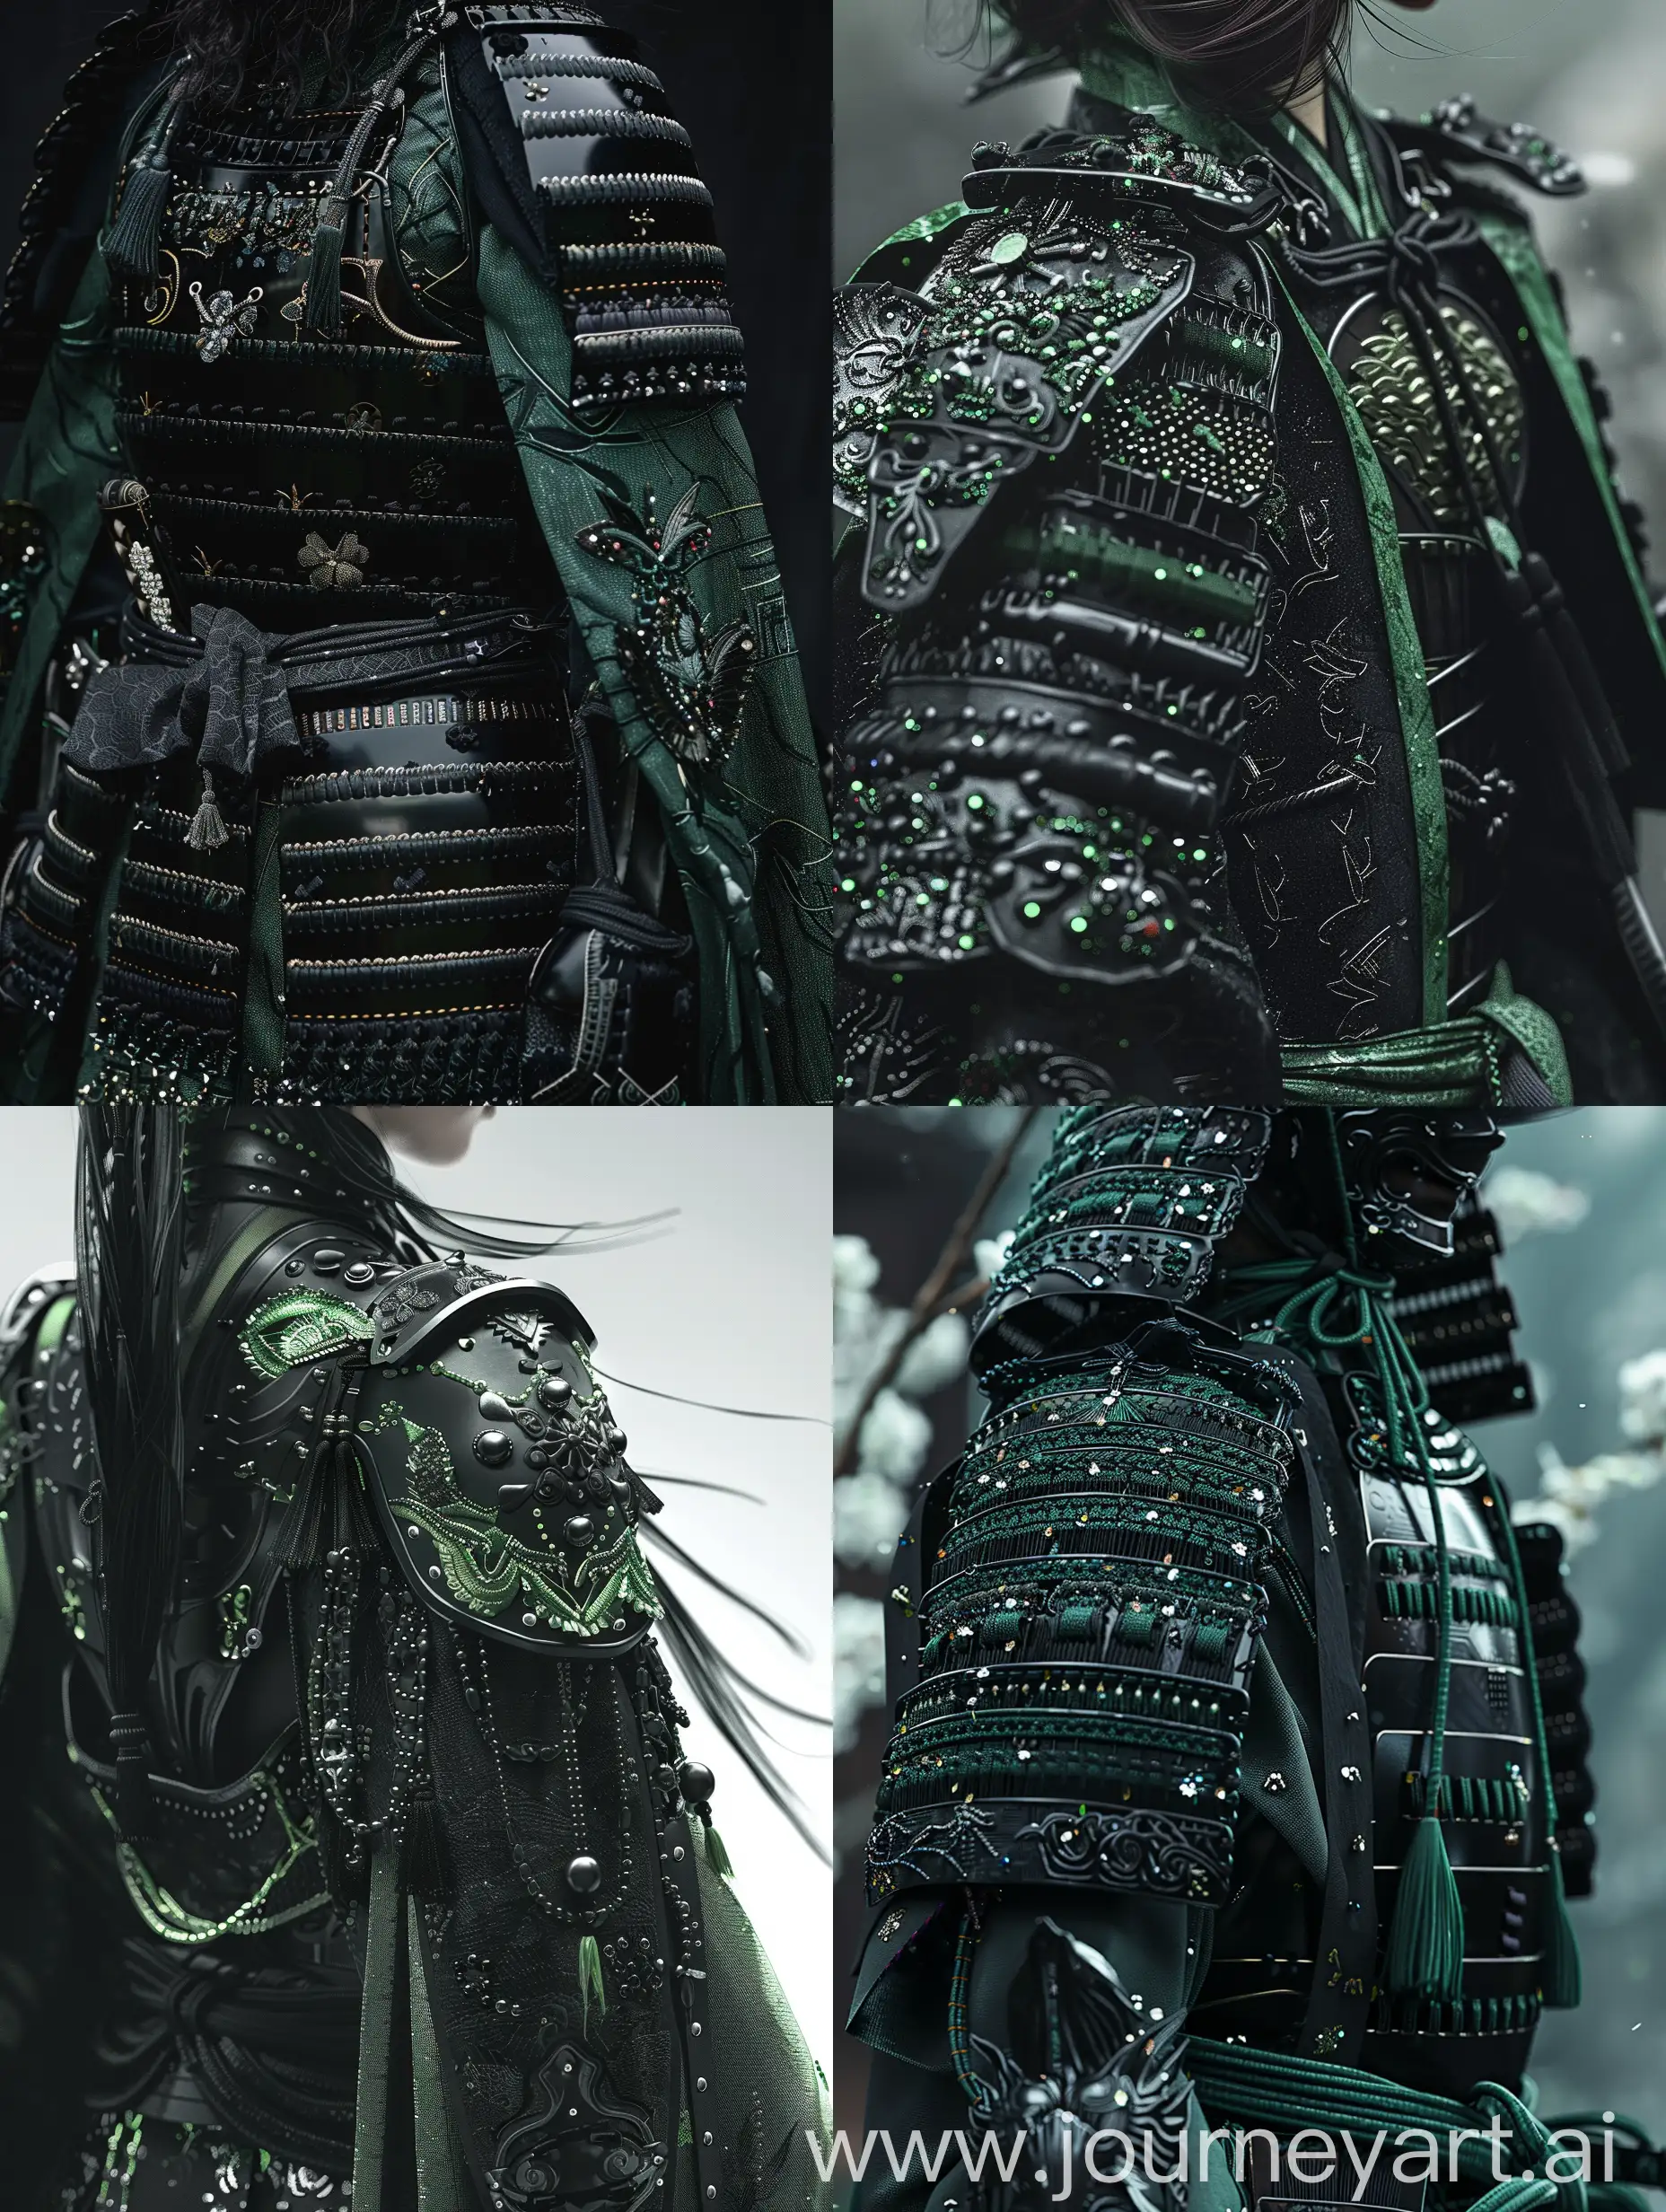 Details: Detailed embellishments on the black and green ō-yoroi armor's textile catch and reflect light, adding depth to the visual story. Every detail, from the smallest to the overall character's silhouette, is carefully shown, creating a visually and emotionally appealing image.